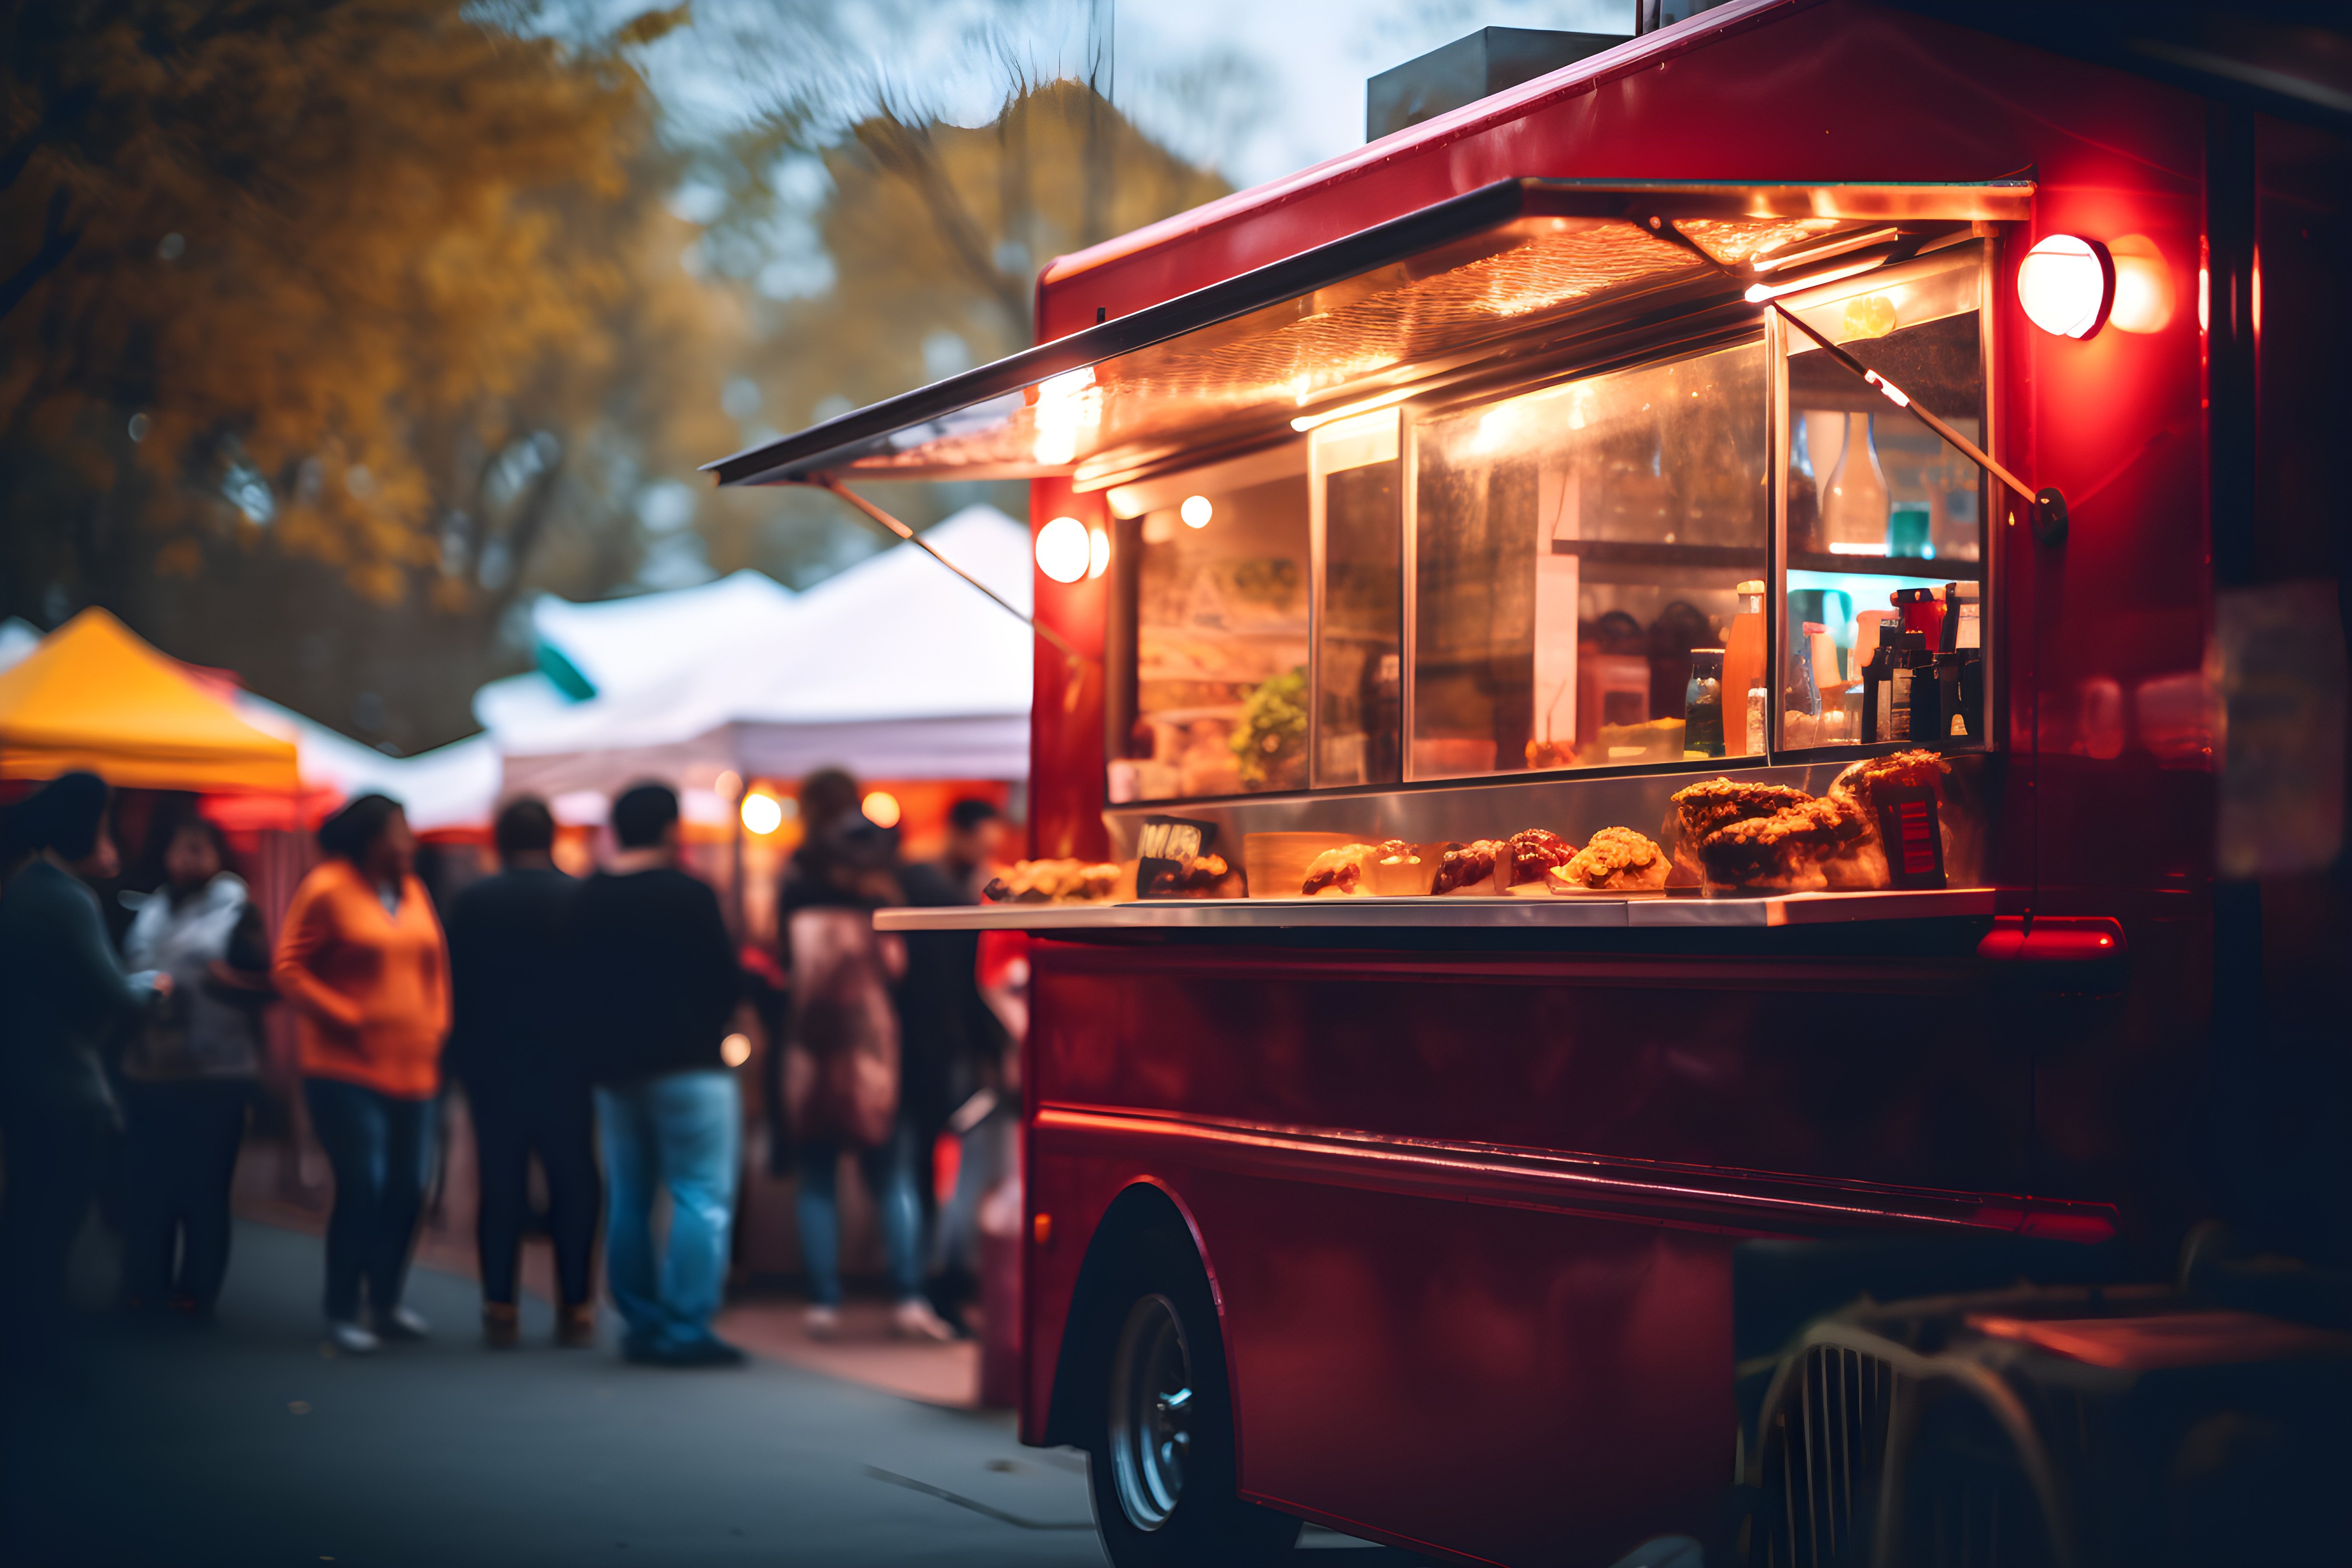  Gear Up for Spring and Summer: Keeping Your Food Truck Safe and Inspection-Ready